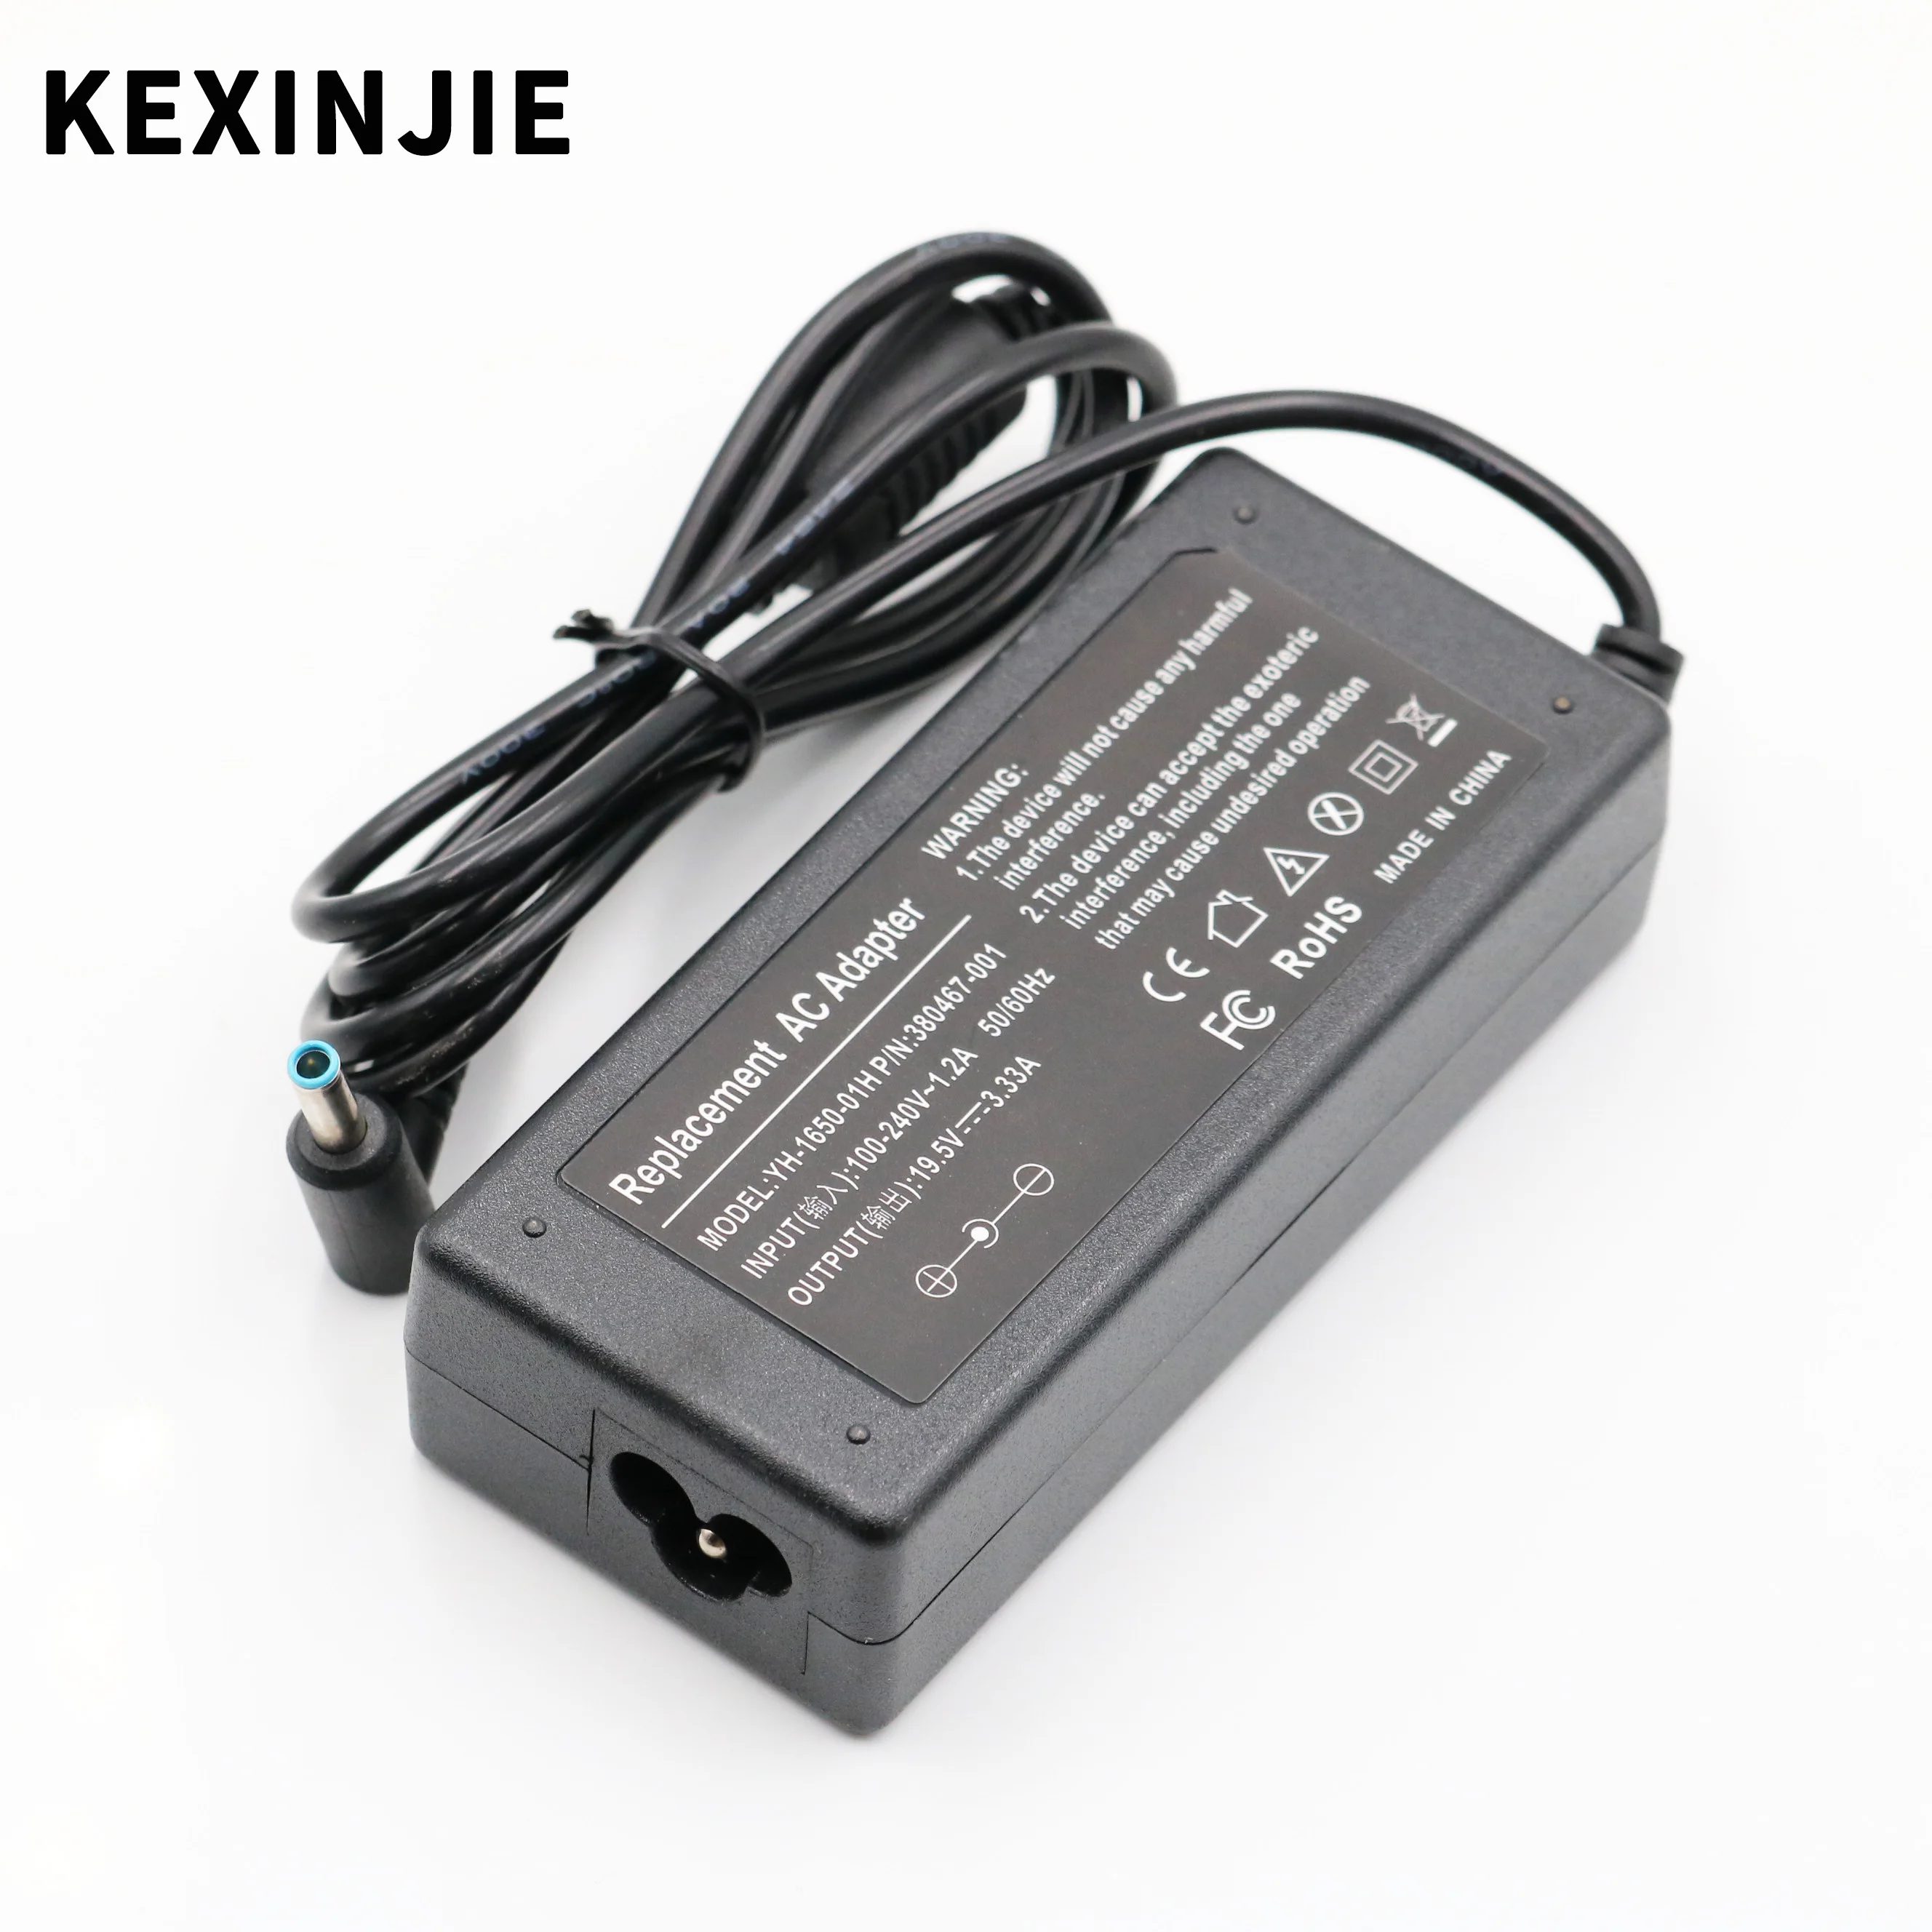 

19.5V 3.33A 65W Laptop AC Power Adapter For HP Charger 246 G3 246 G4 248 G1 250 G2 250 G3 250 G4 255 G2 255 G3 255 G4 256 G2